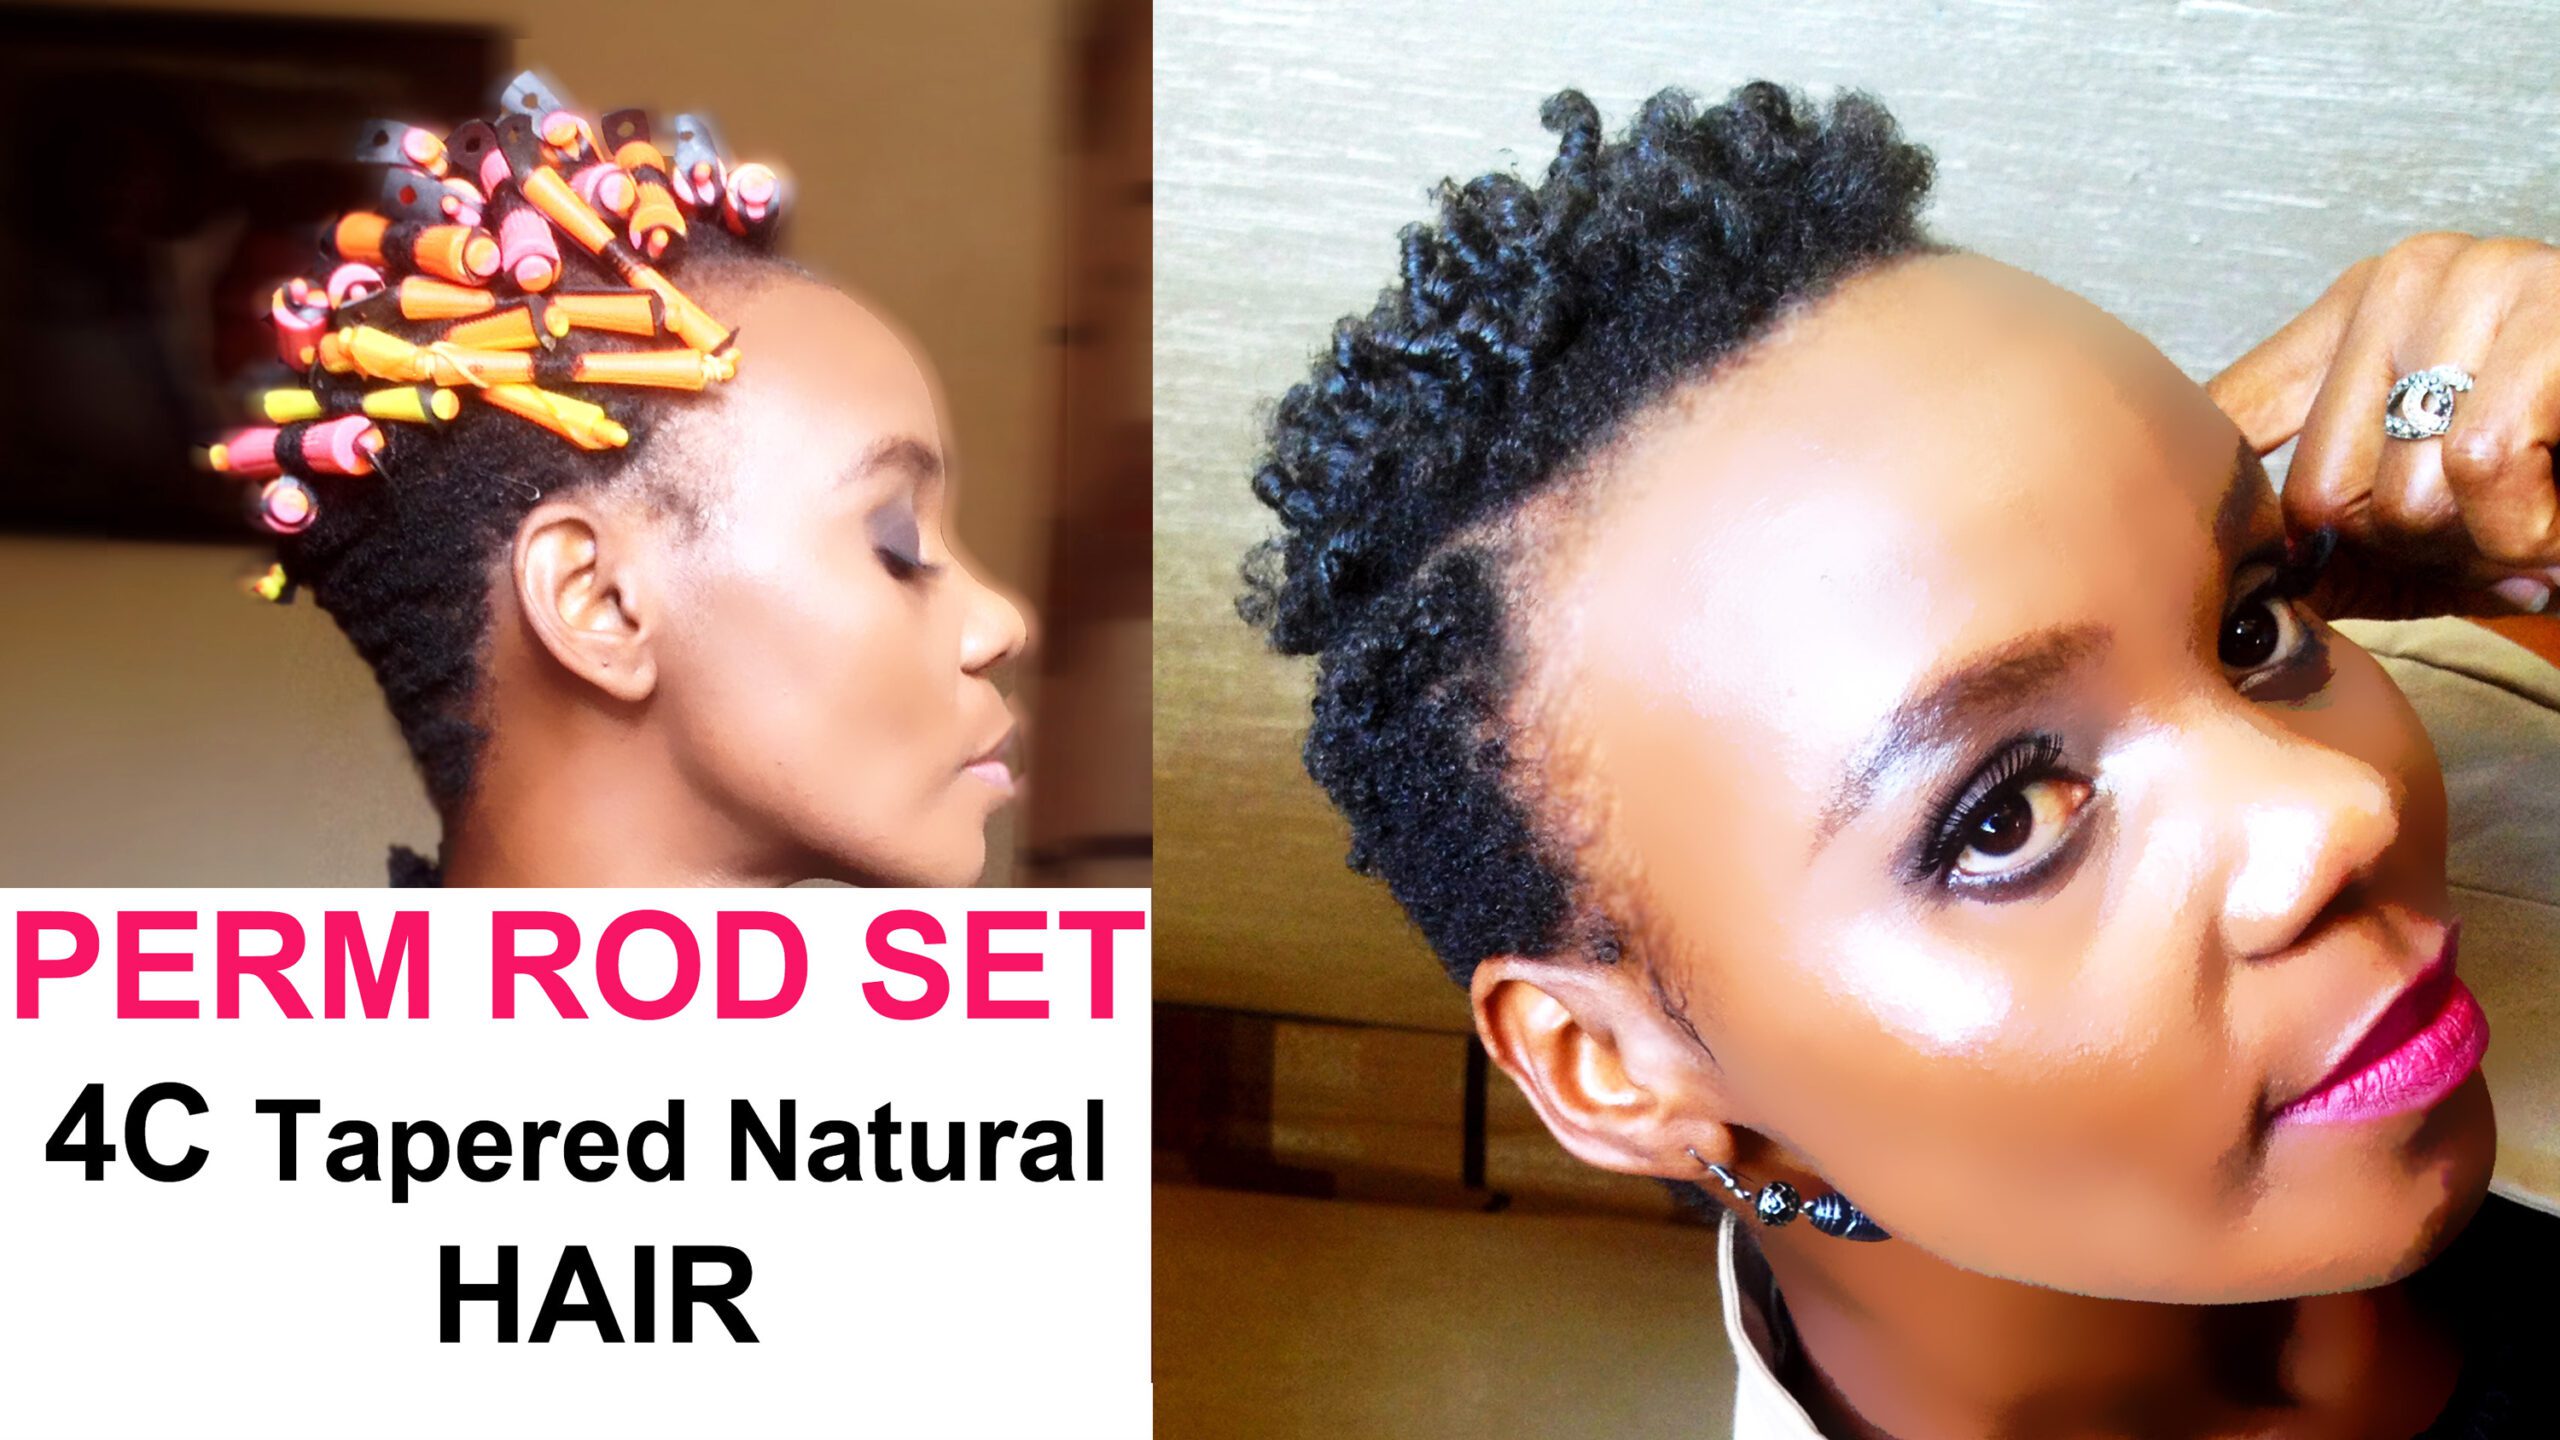 How to Do a Perm Rod Hairstyle on Short Hair